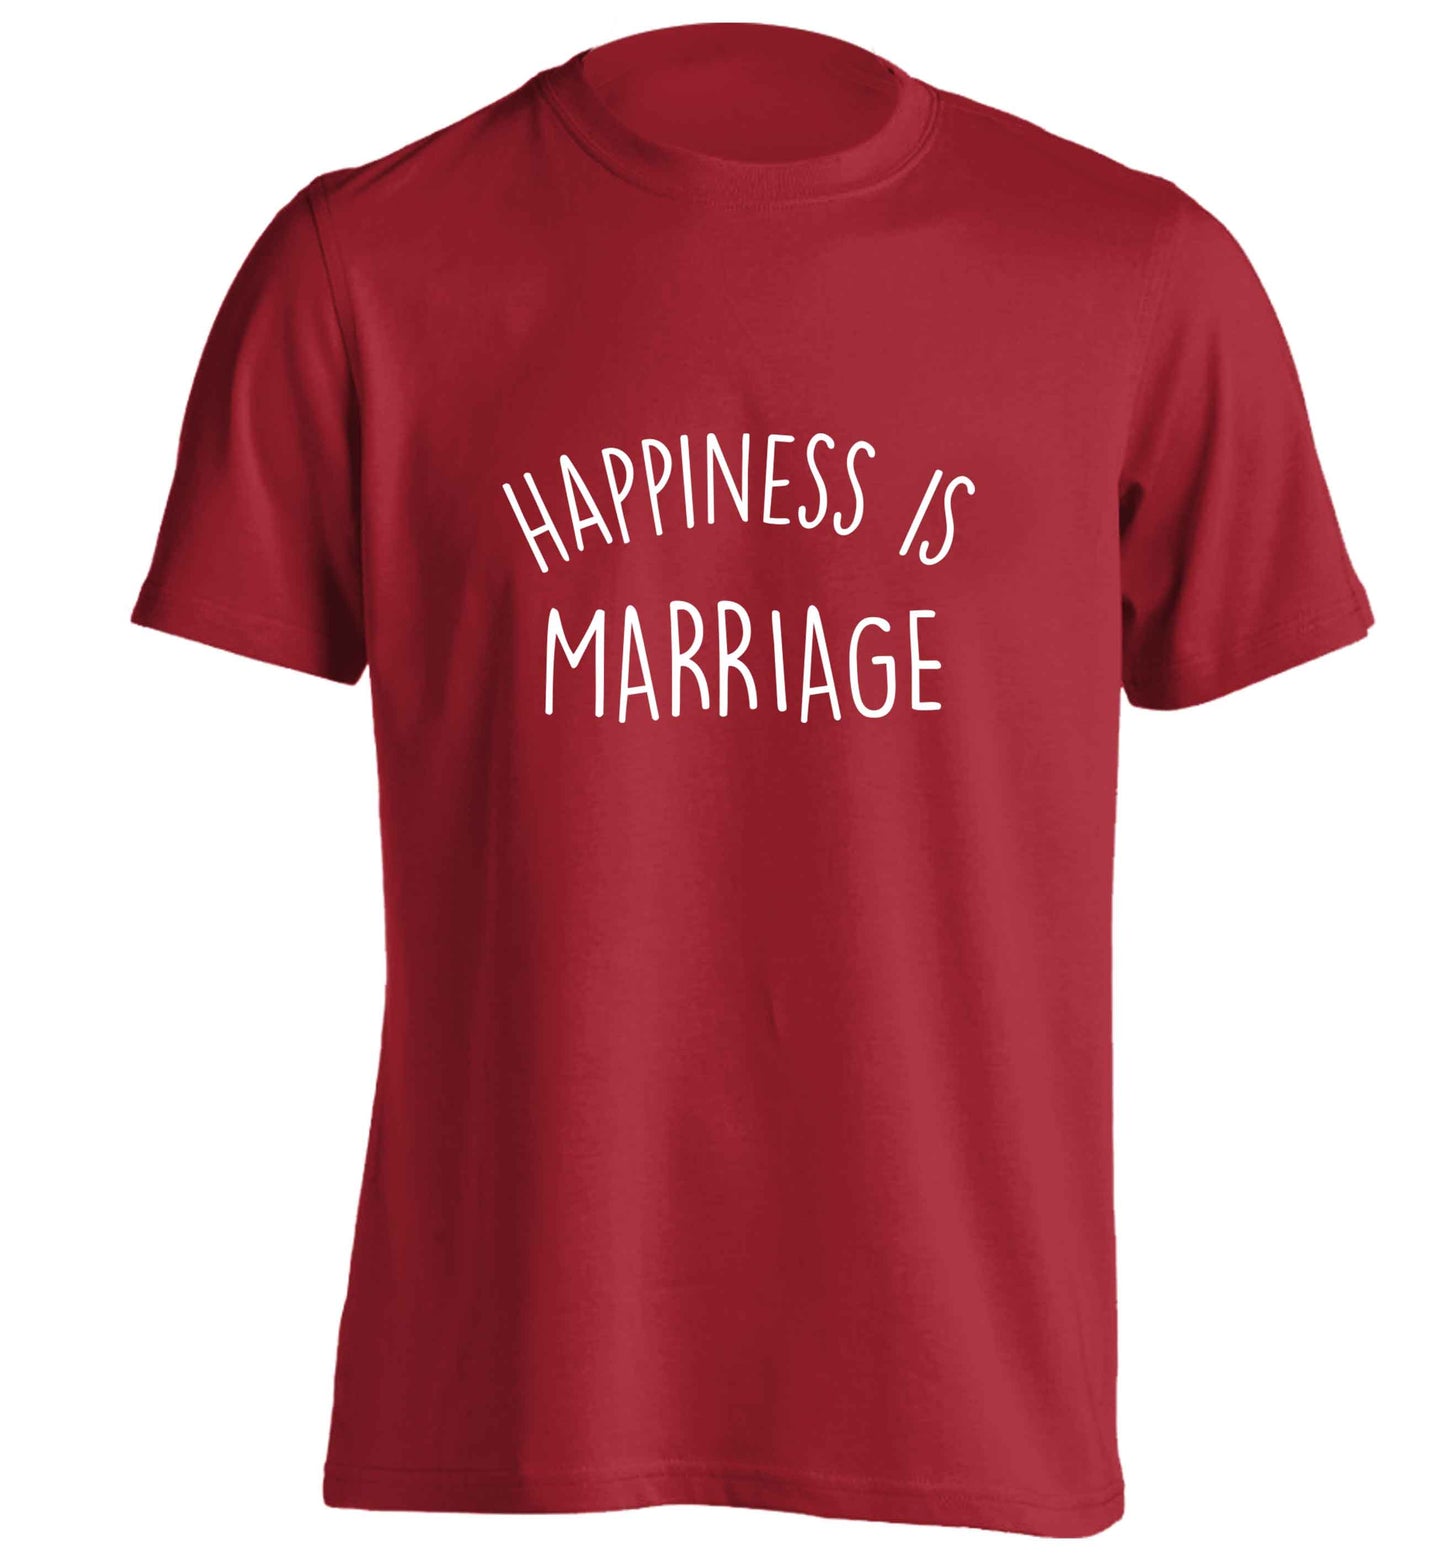 Happiness is marriage adults unisex red Tshirt 2XL